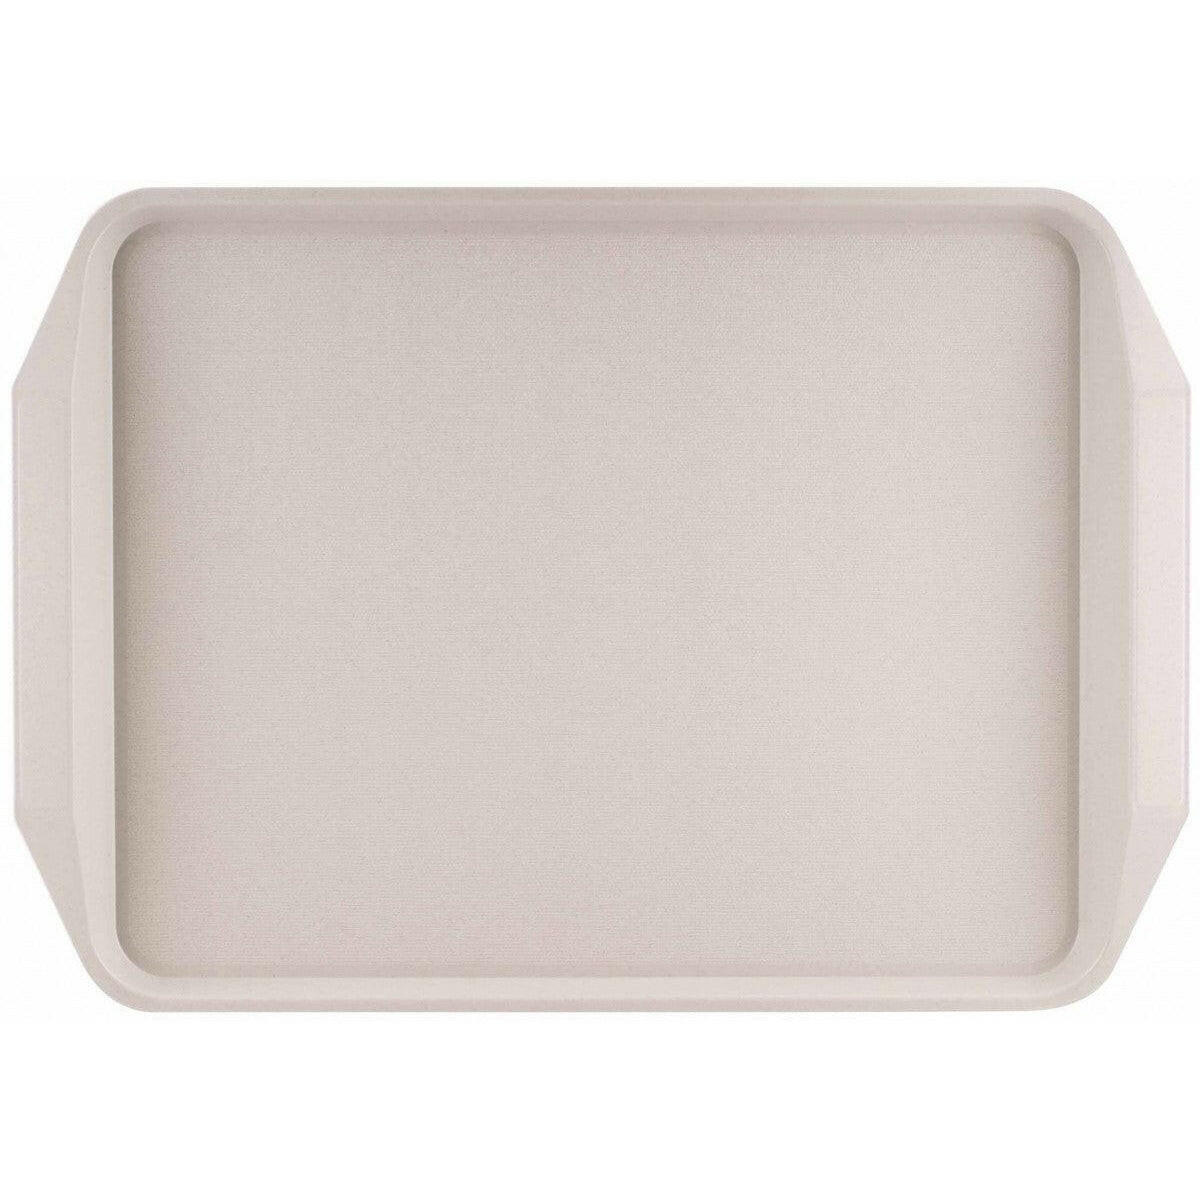 ABS Handle Service Tray 43.5cm x 30.5cm - Cater-Connect Ltd